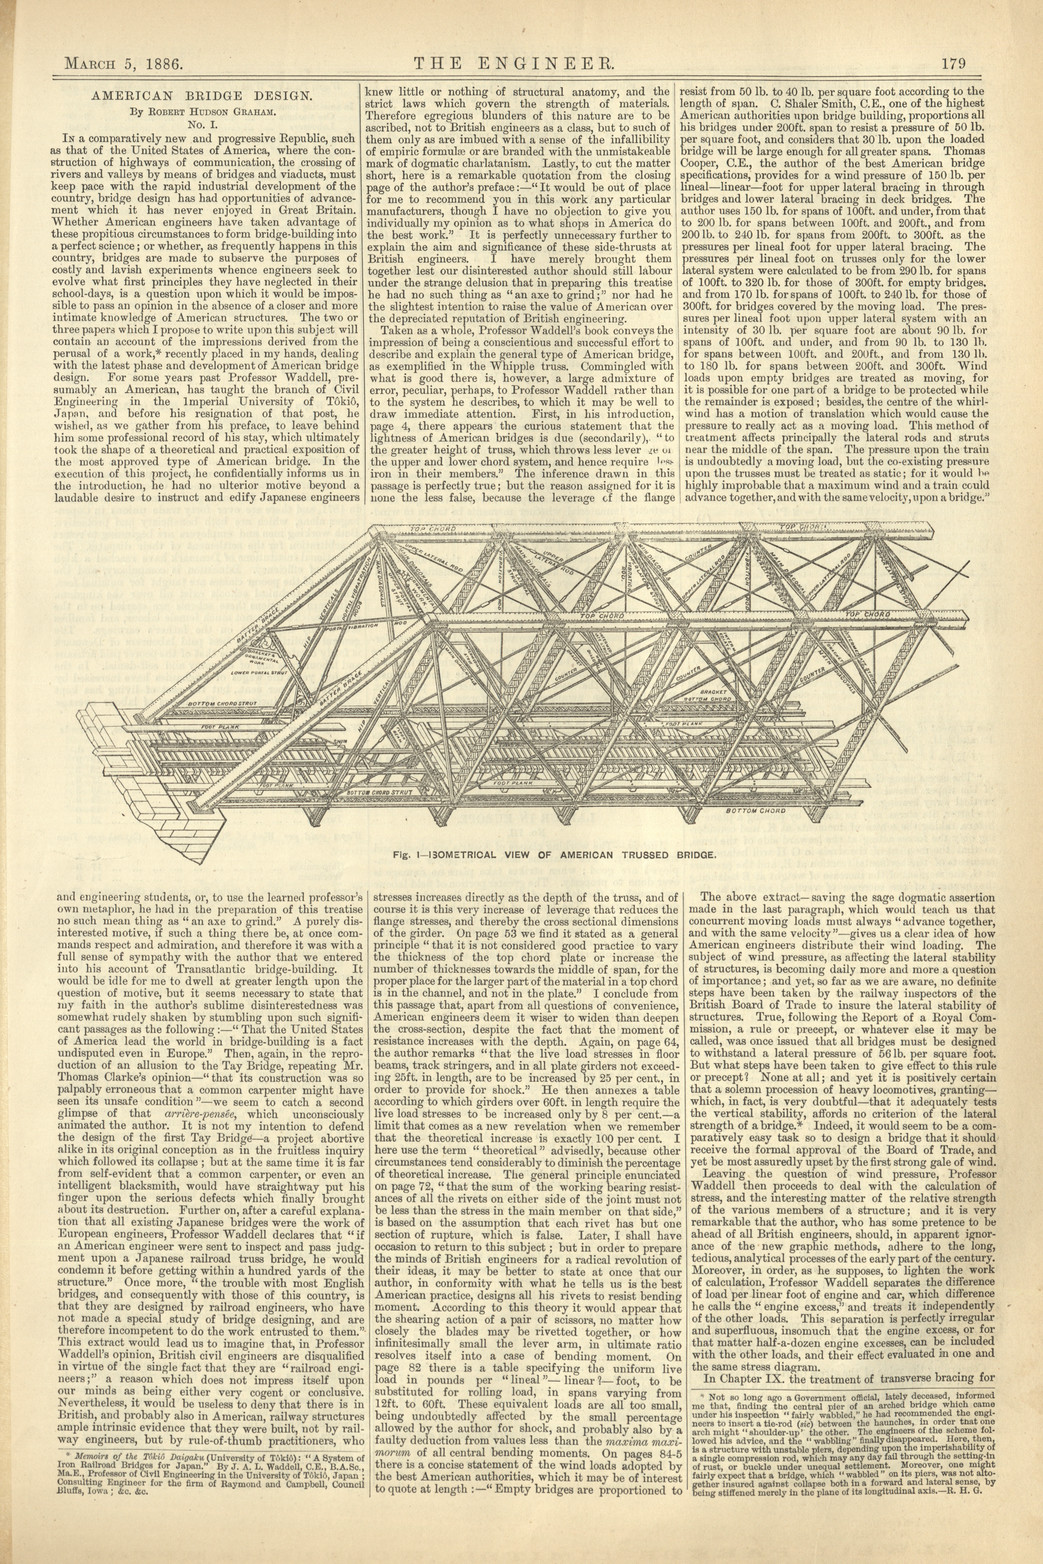 The Engineer, Vol. 61, 05 March